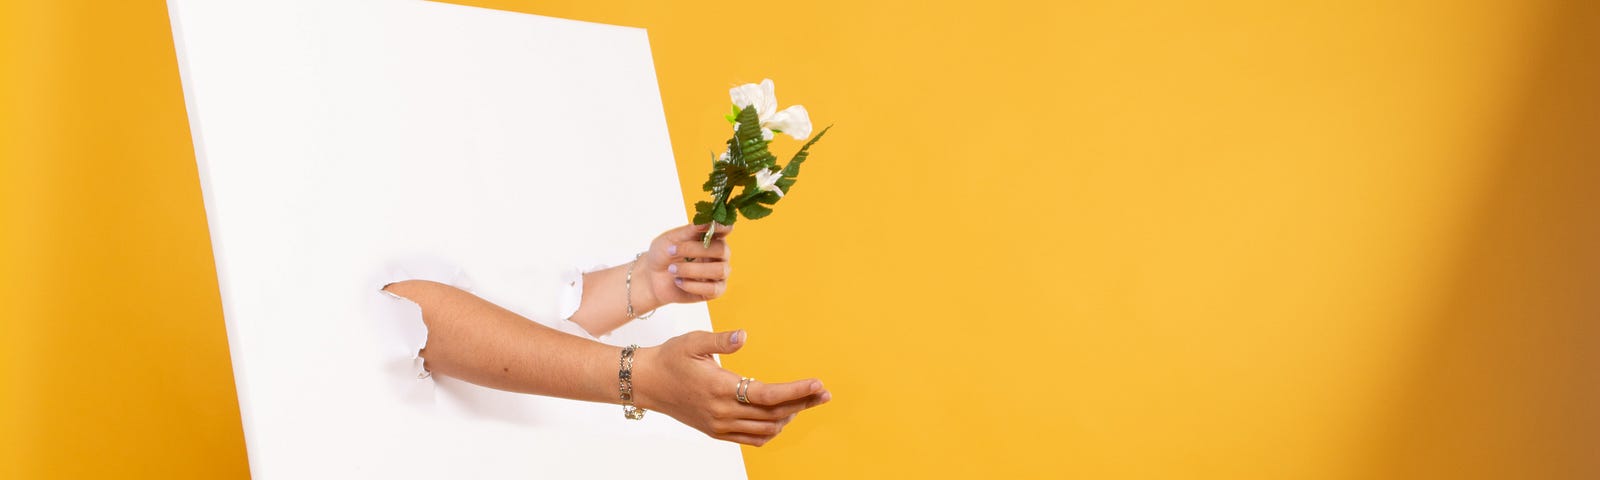 Cnavas with 3D hands emerging from it, holding a bunch of flowers